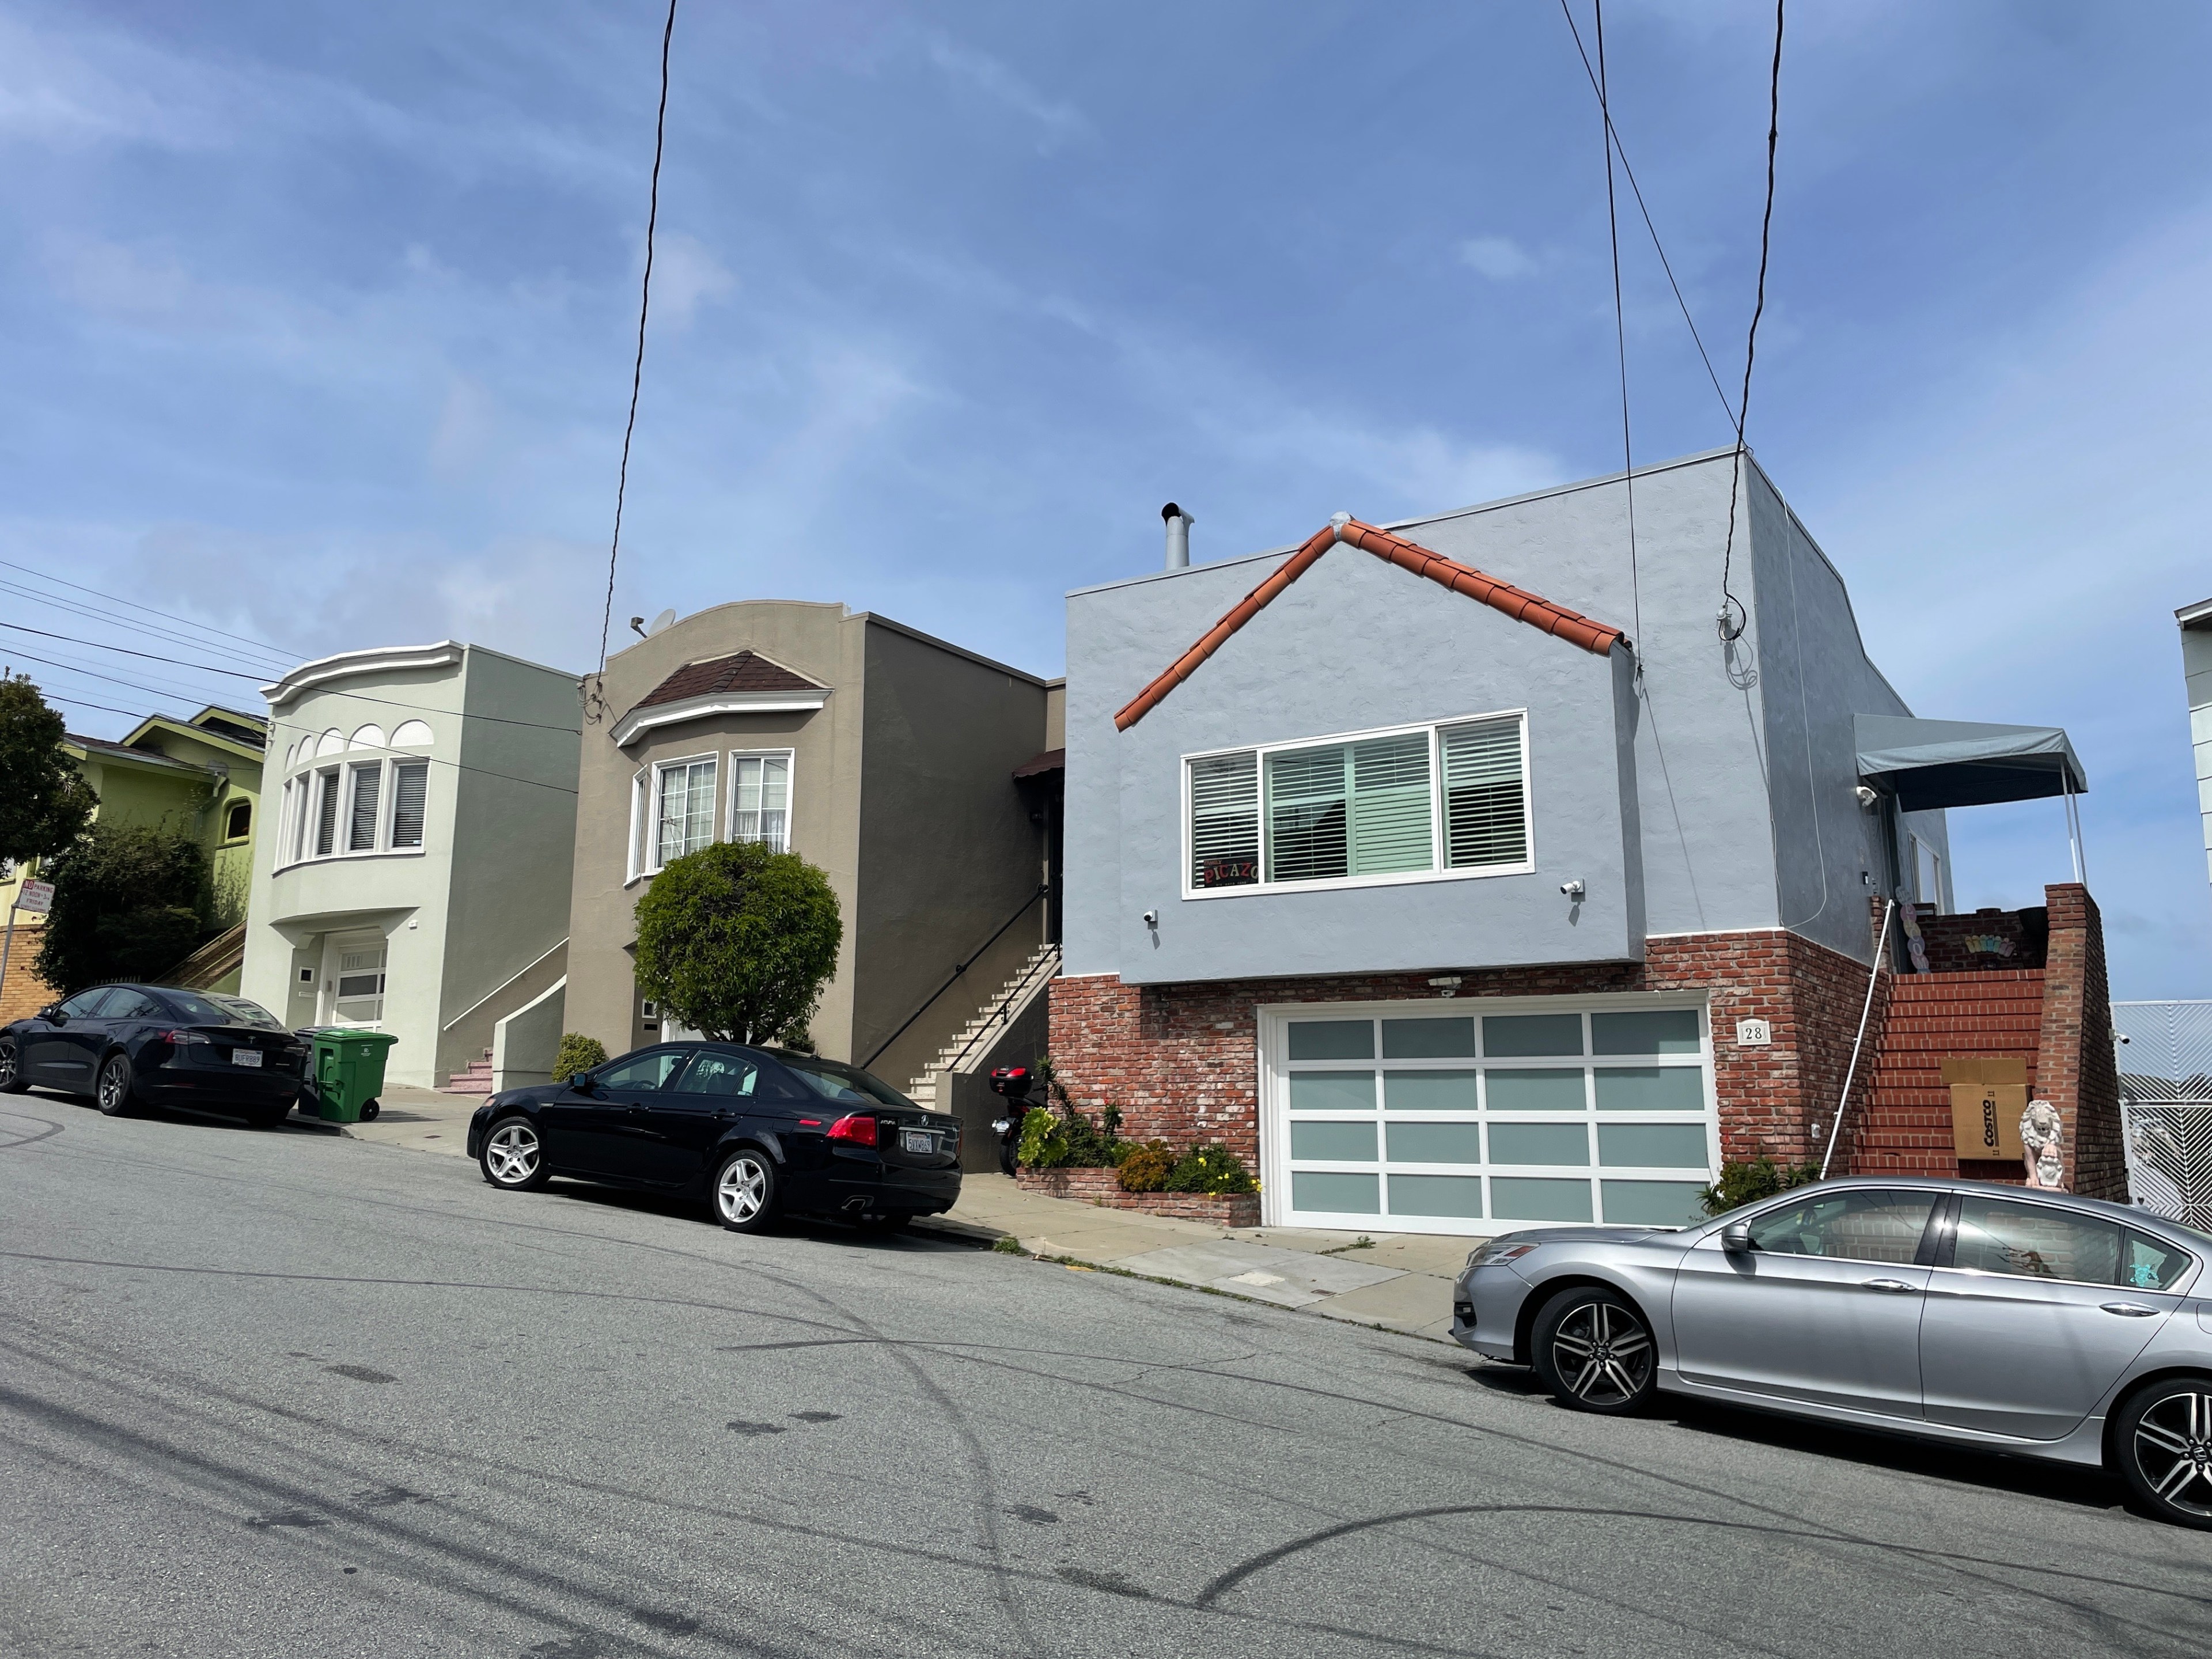 Three houses on a steep hill with parked cars, under a partly cloudy sky.